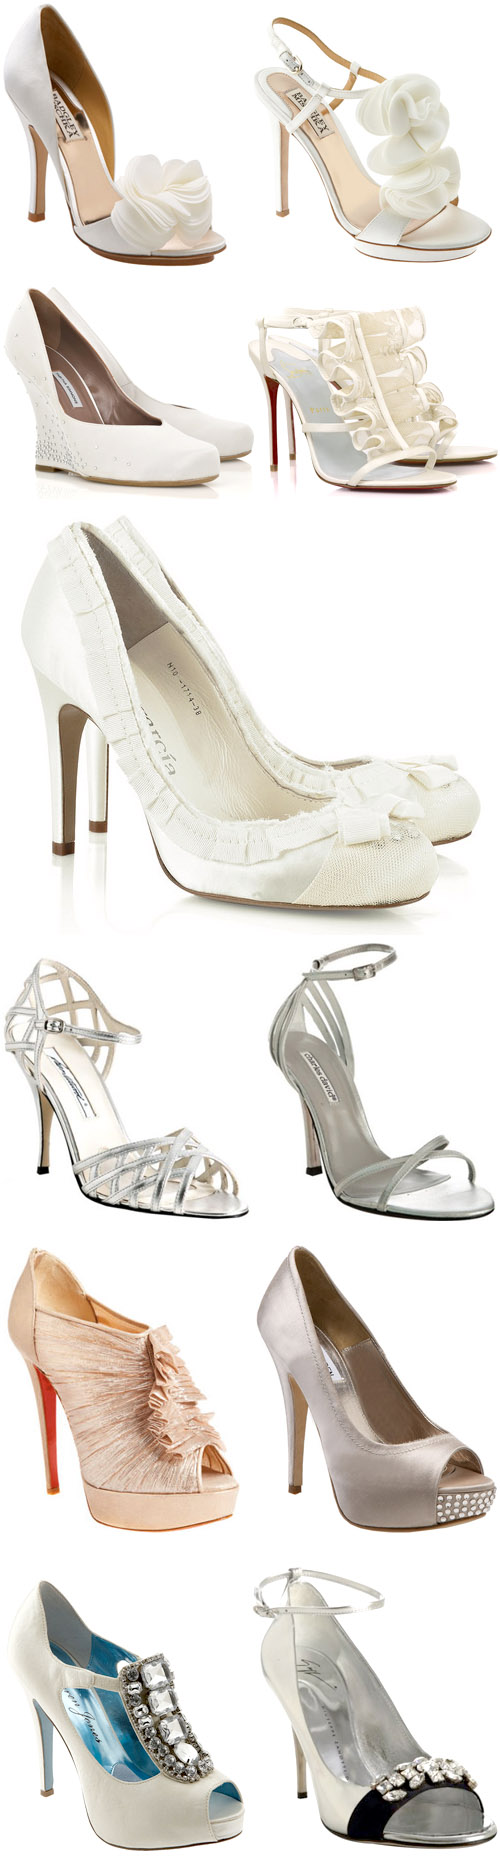 white, silver and metallic wedding shoes